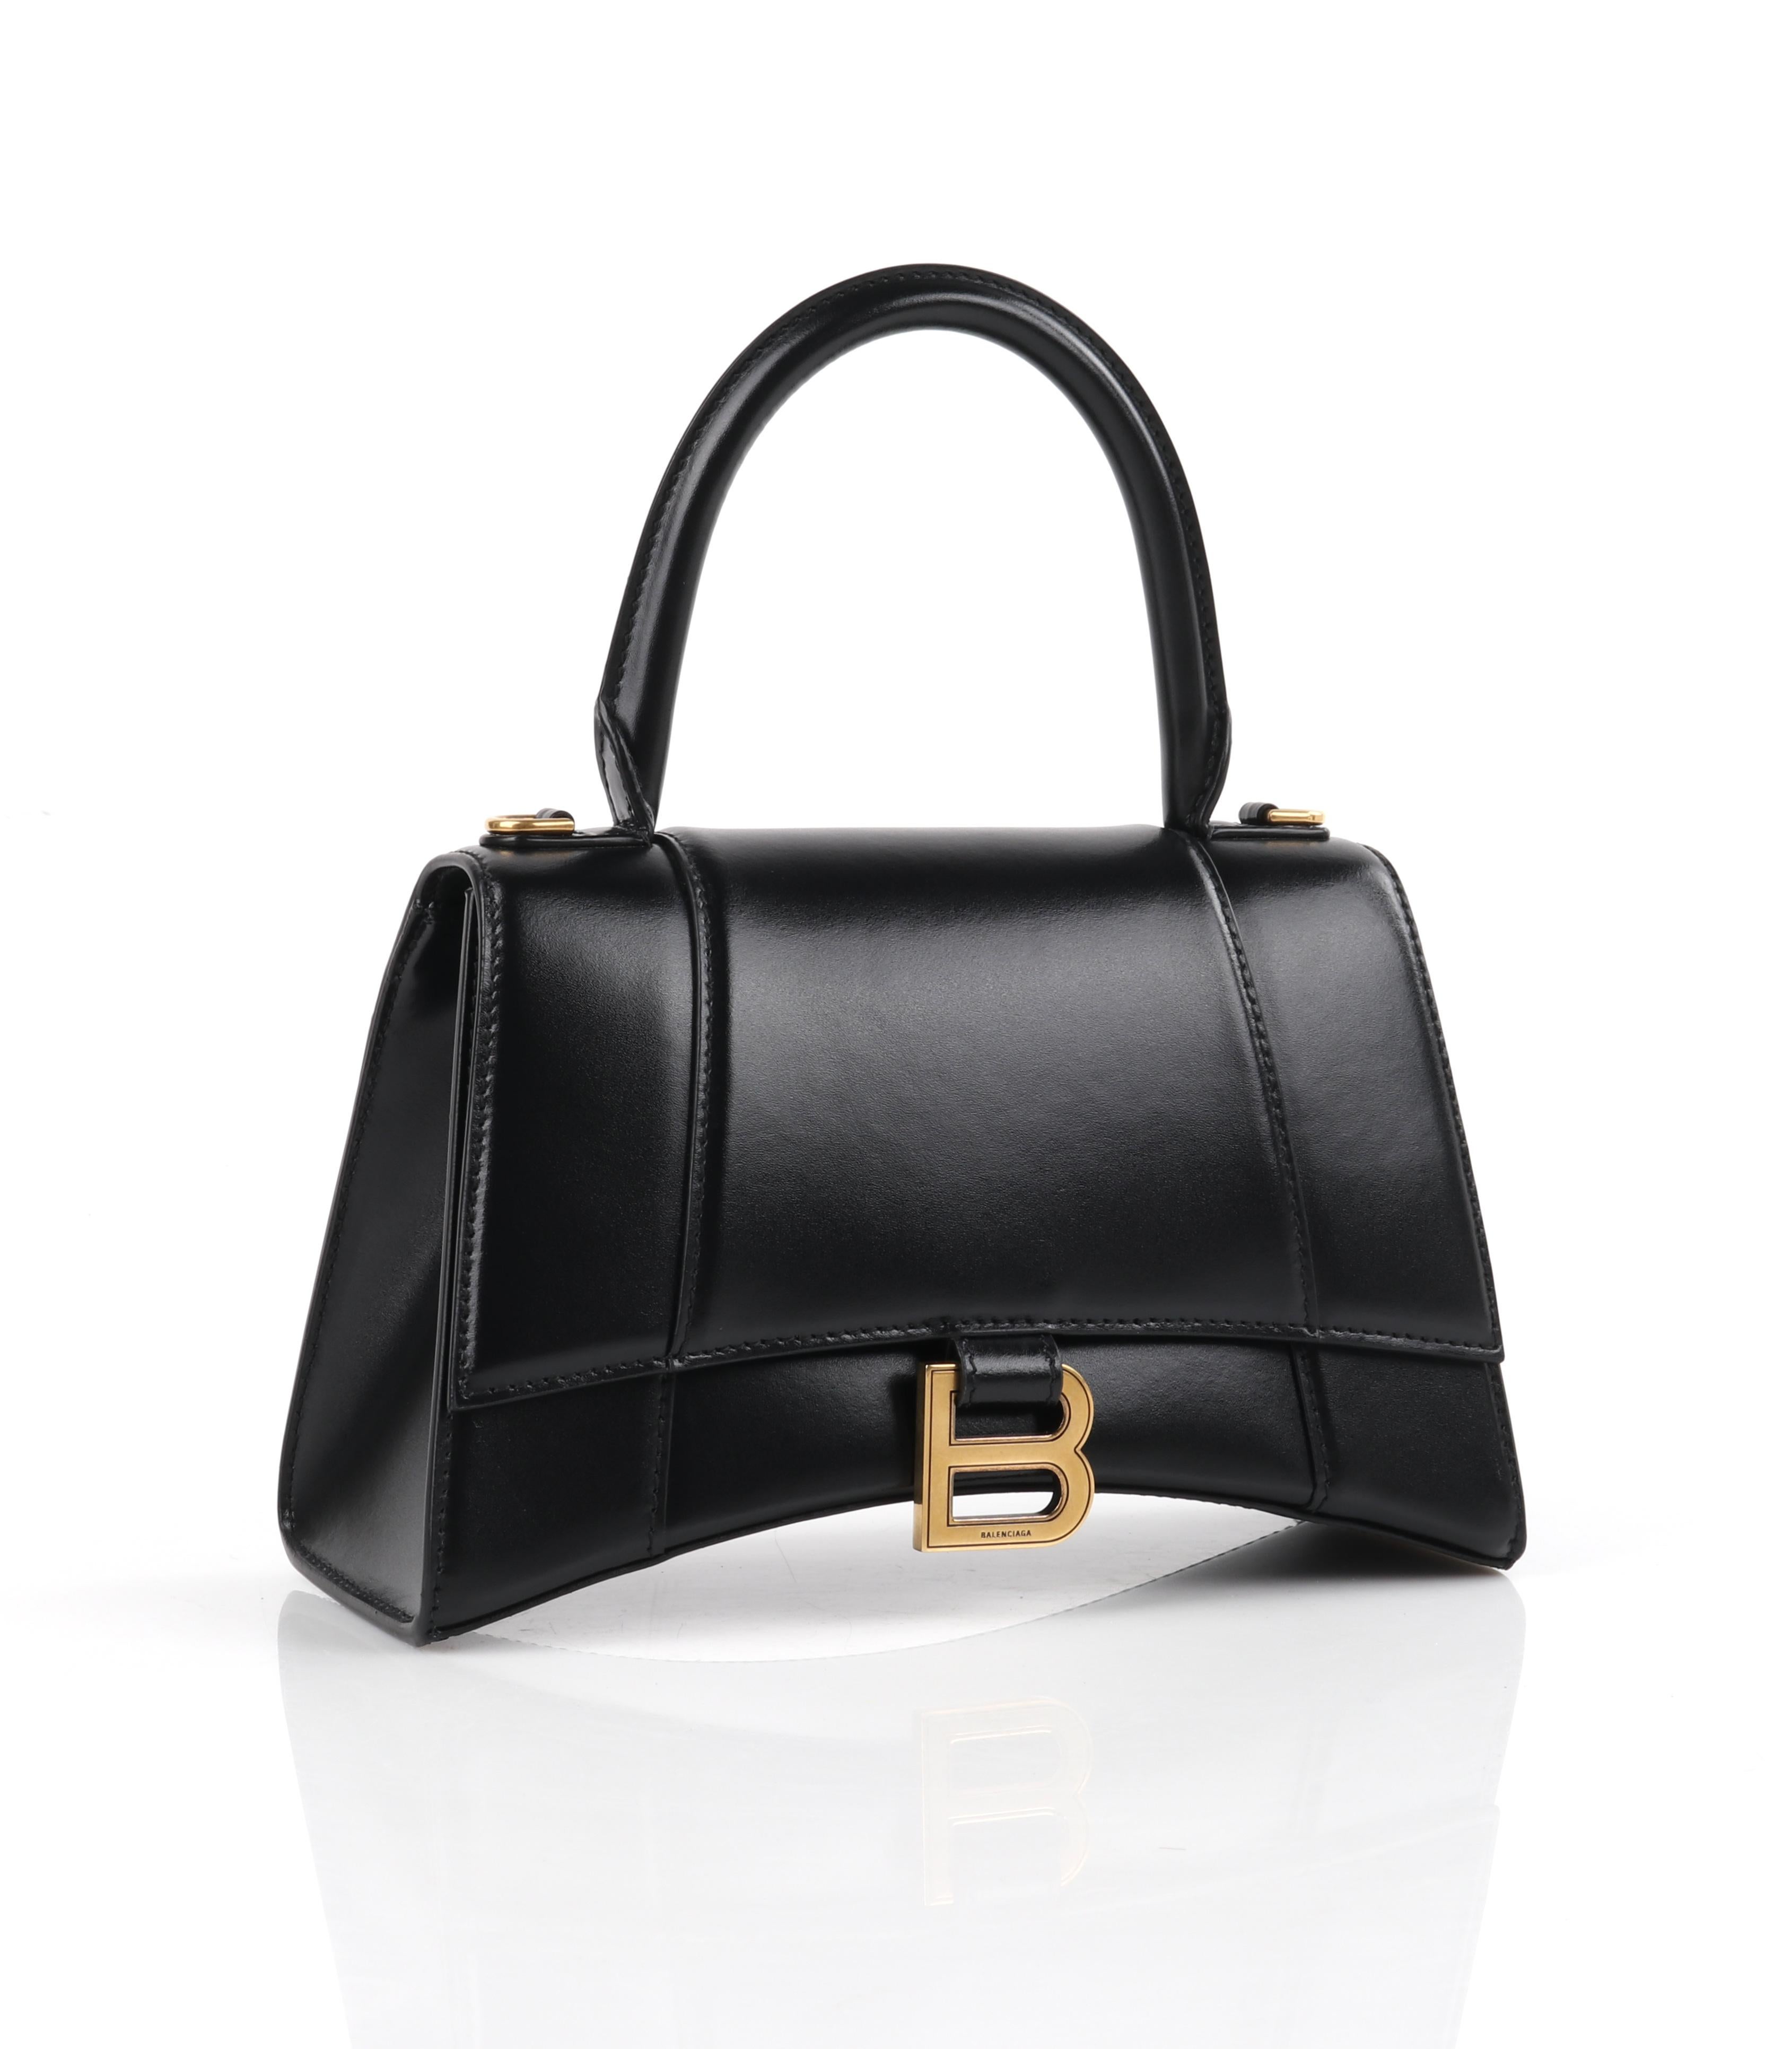 BALENCIAGA Small Black Shiny Calfskin Gold Brass Hardware “Hourglass” Handle Bag
 
Brand / Manufacturer: Balenciaga
Manufacturer Style Name: Hourglass Small Top Handle Bag
Style: Handbag
Color(s): Shades of black and gold
Lined: No
Marked Fabric